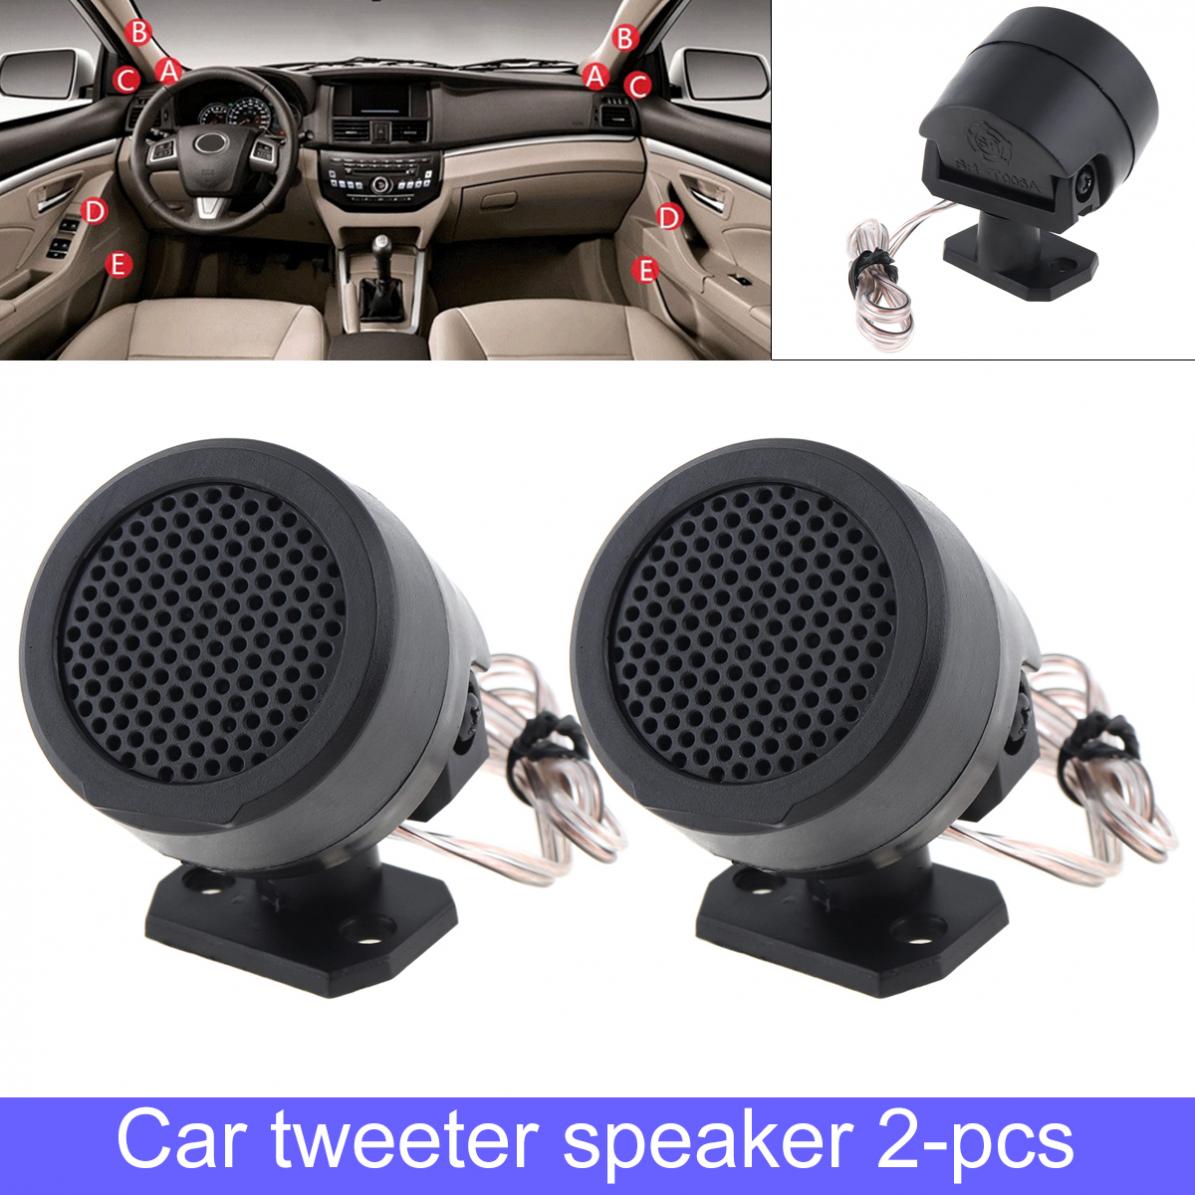 2 Pair Car Stereo Speaker Tweeter with Subwoofer for Car Audio System 